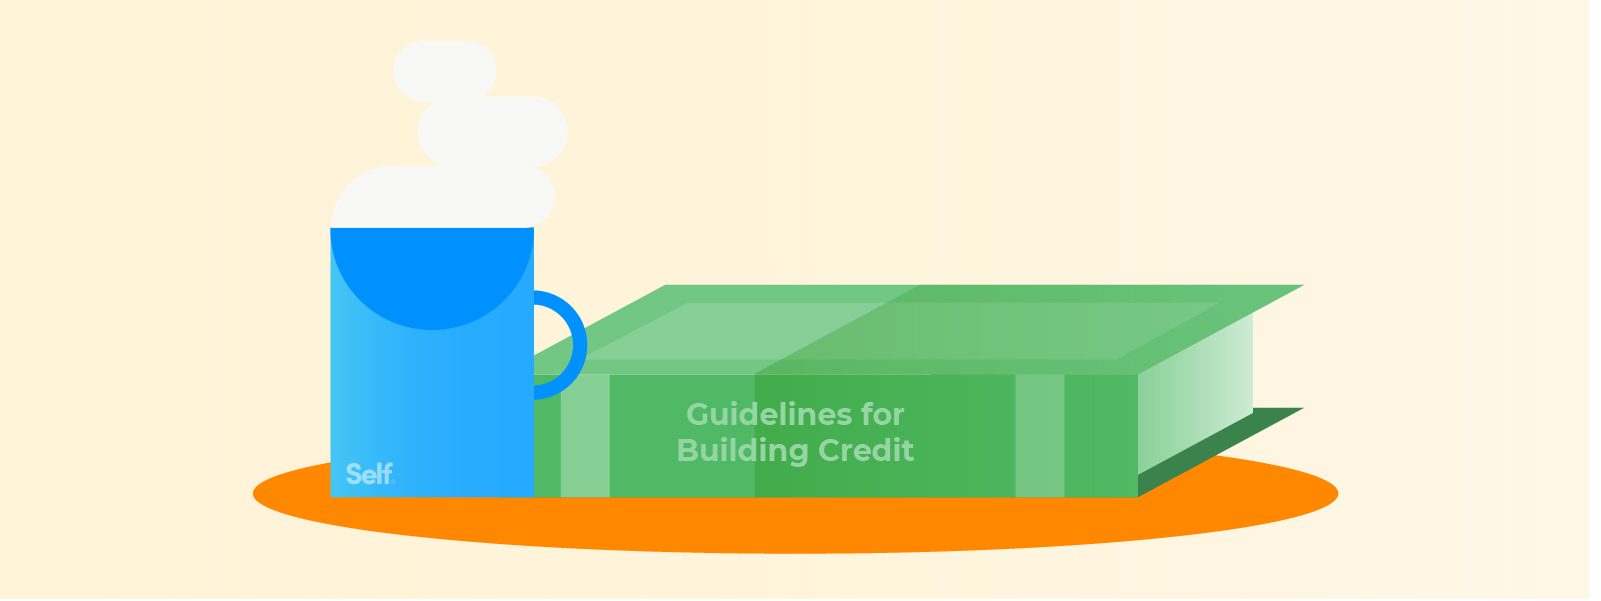 Guidelines for building credit 